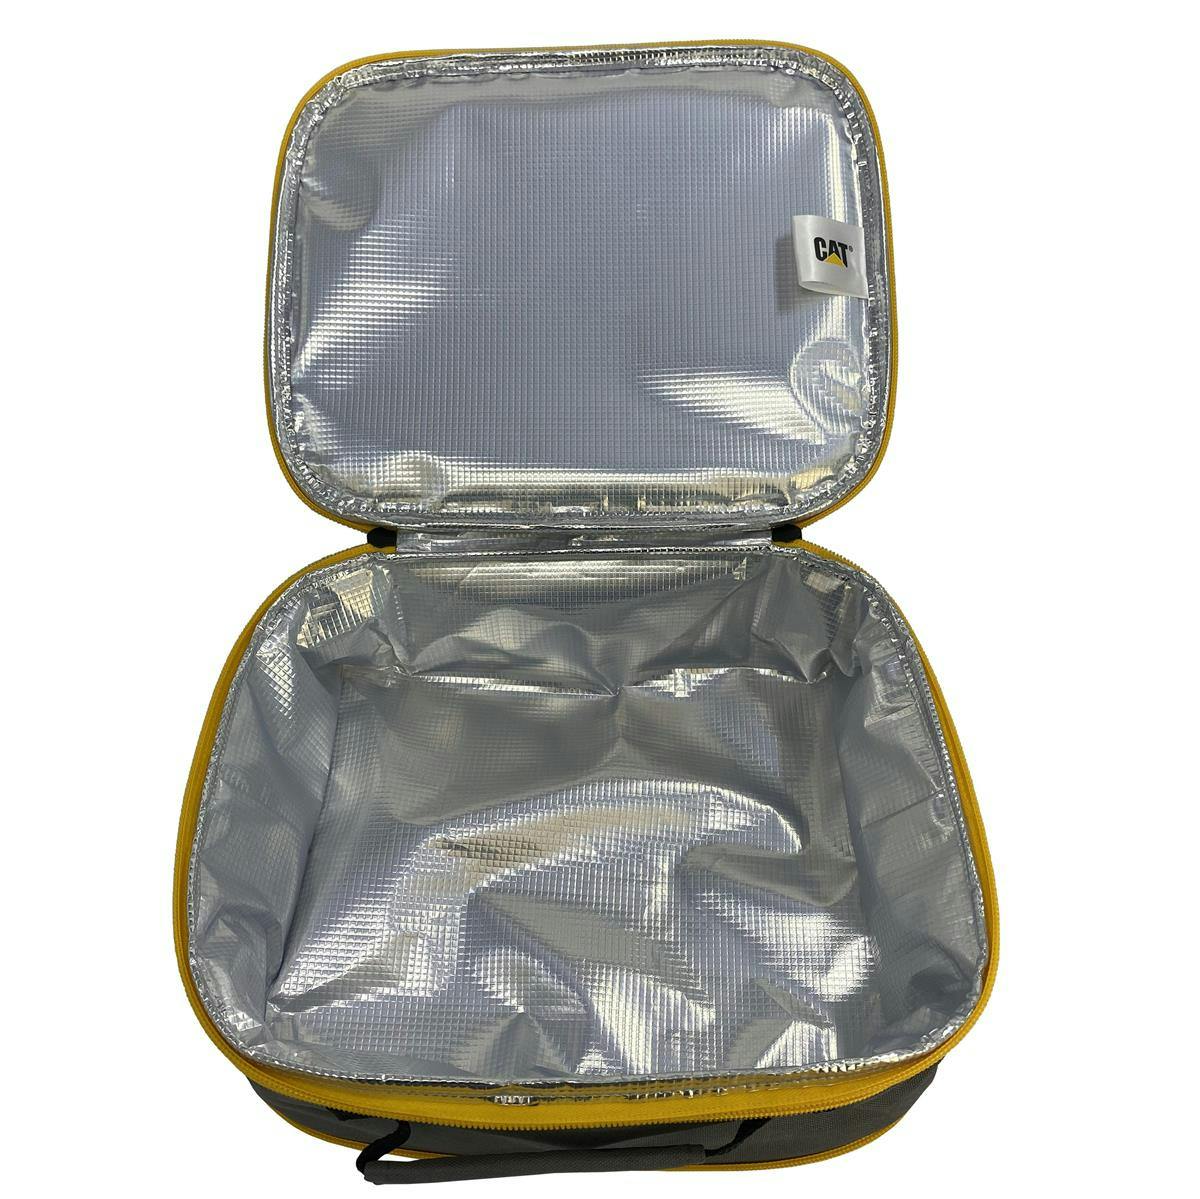 SAC ISOTHERME Glacière 20 LITRES Souple Sangle Isolation Camping